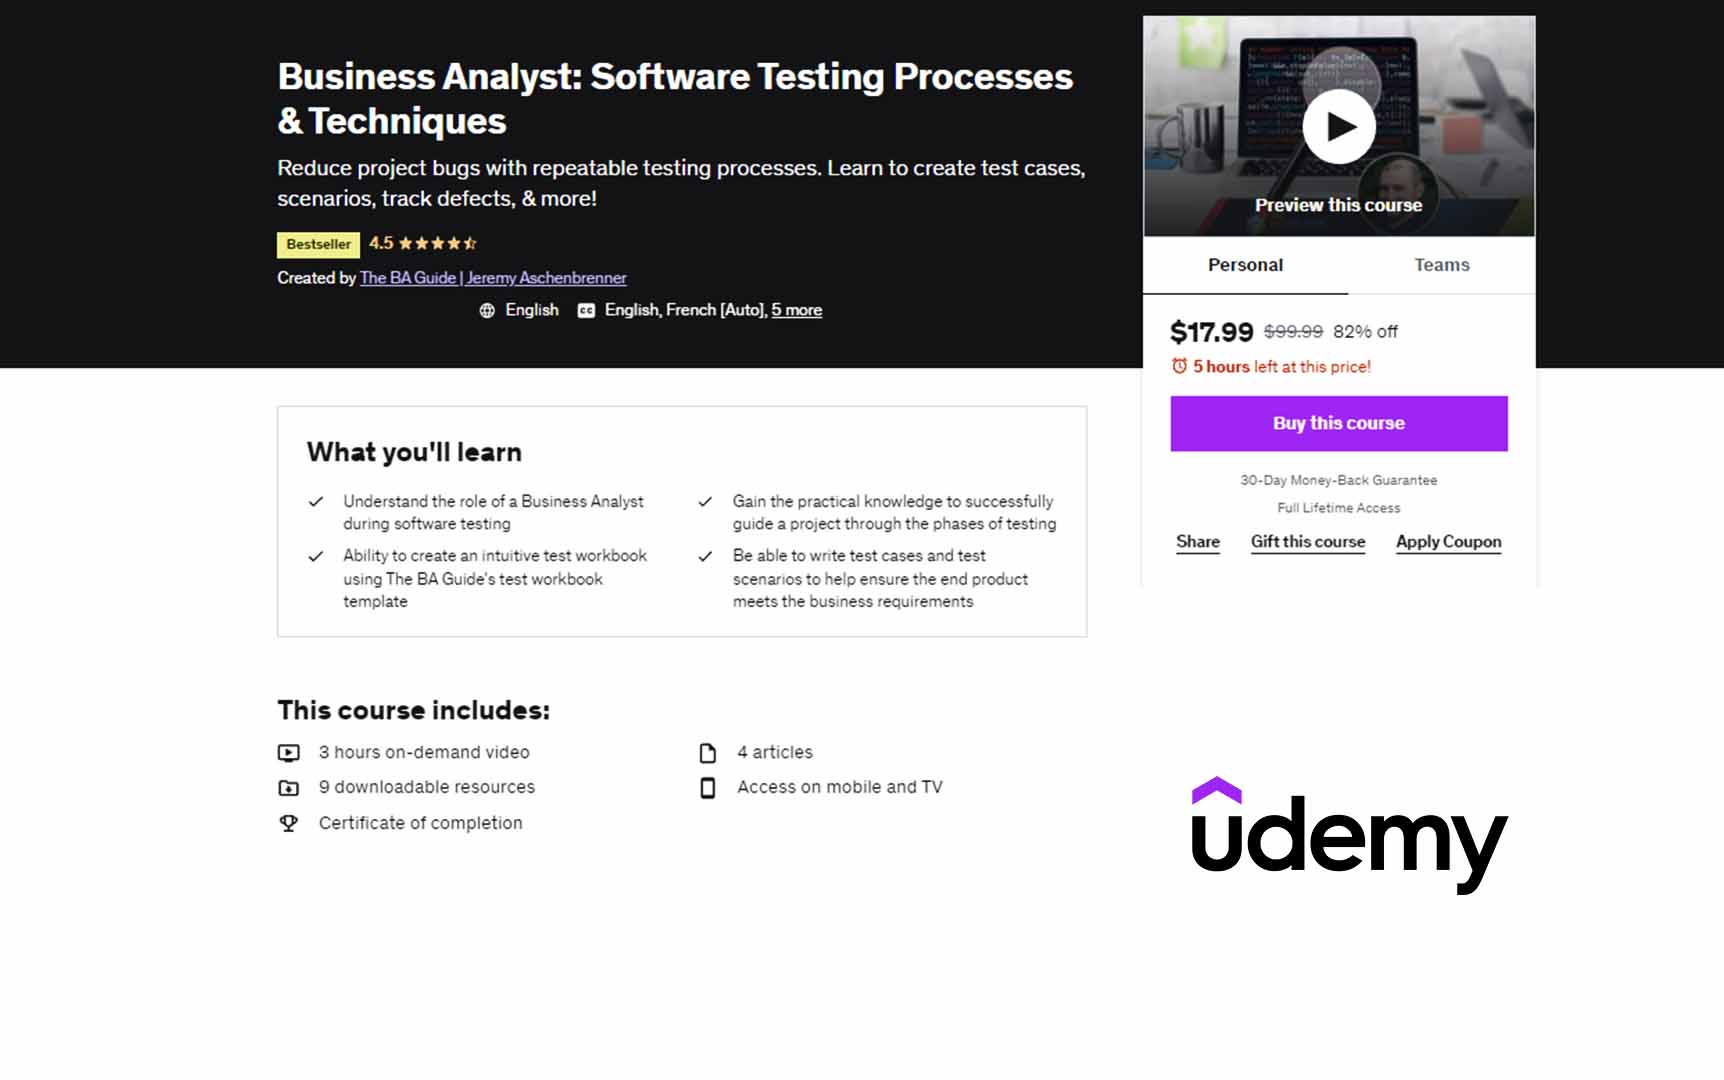 Business Analyst: Software Testing Processes & Techniques